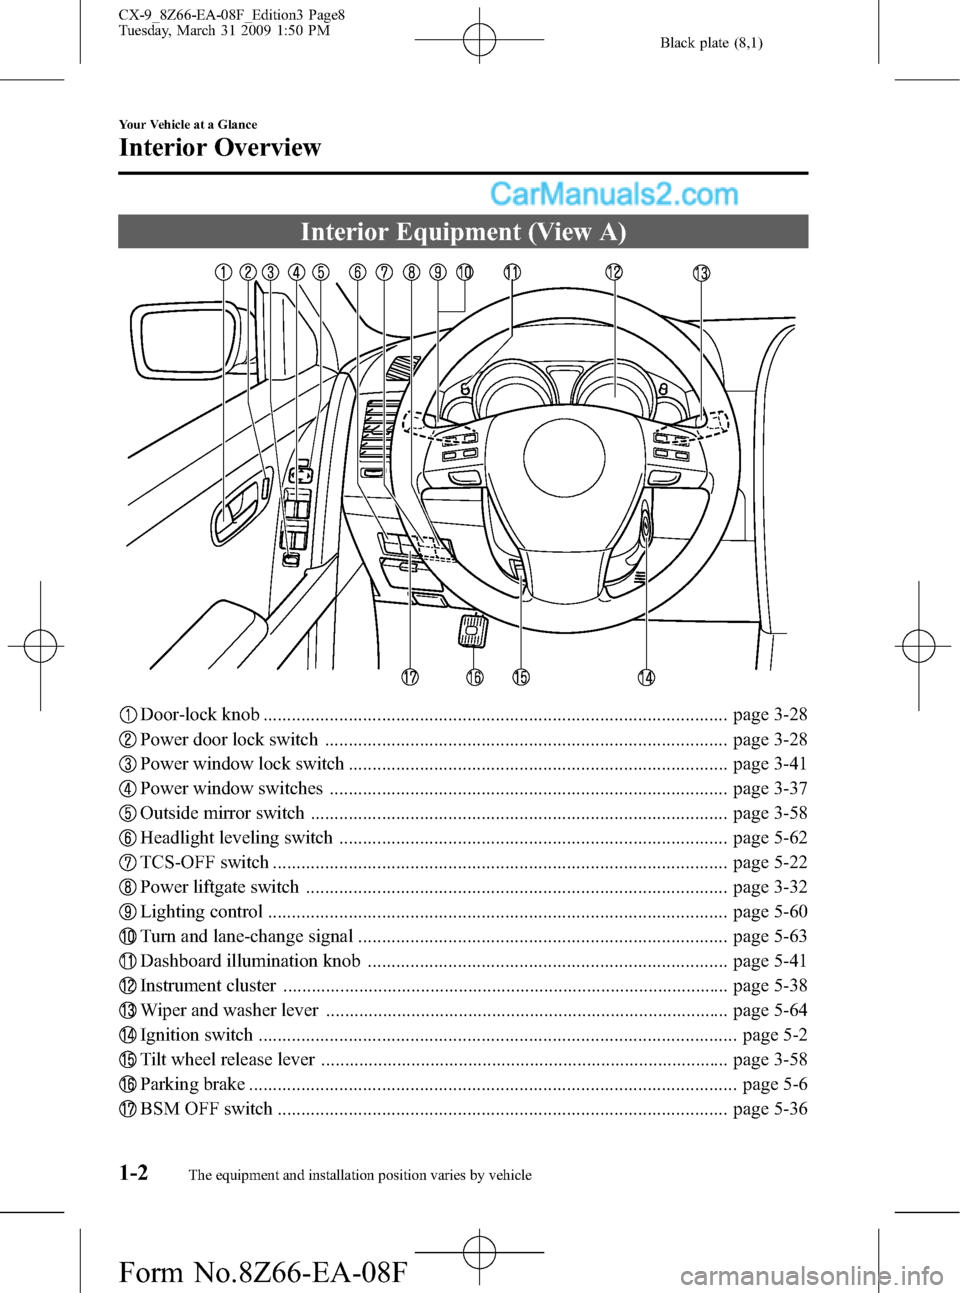 MAZDA MODEL CX-9 2009  Owners Manual (in English) Black plate (8,1)
Interior Equipment (View A)
Door-lock knob .................................................................................................. page 3-28
Power door lock switch .......